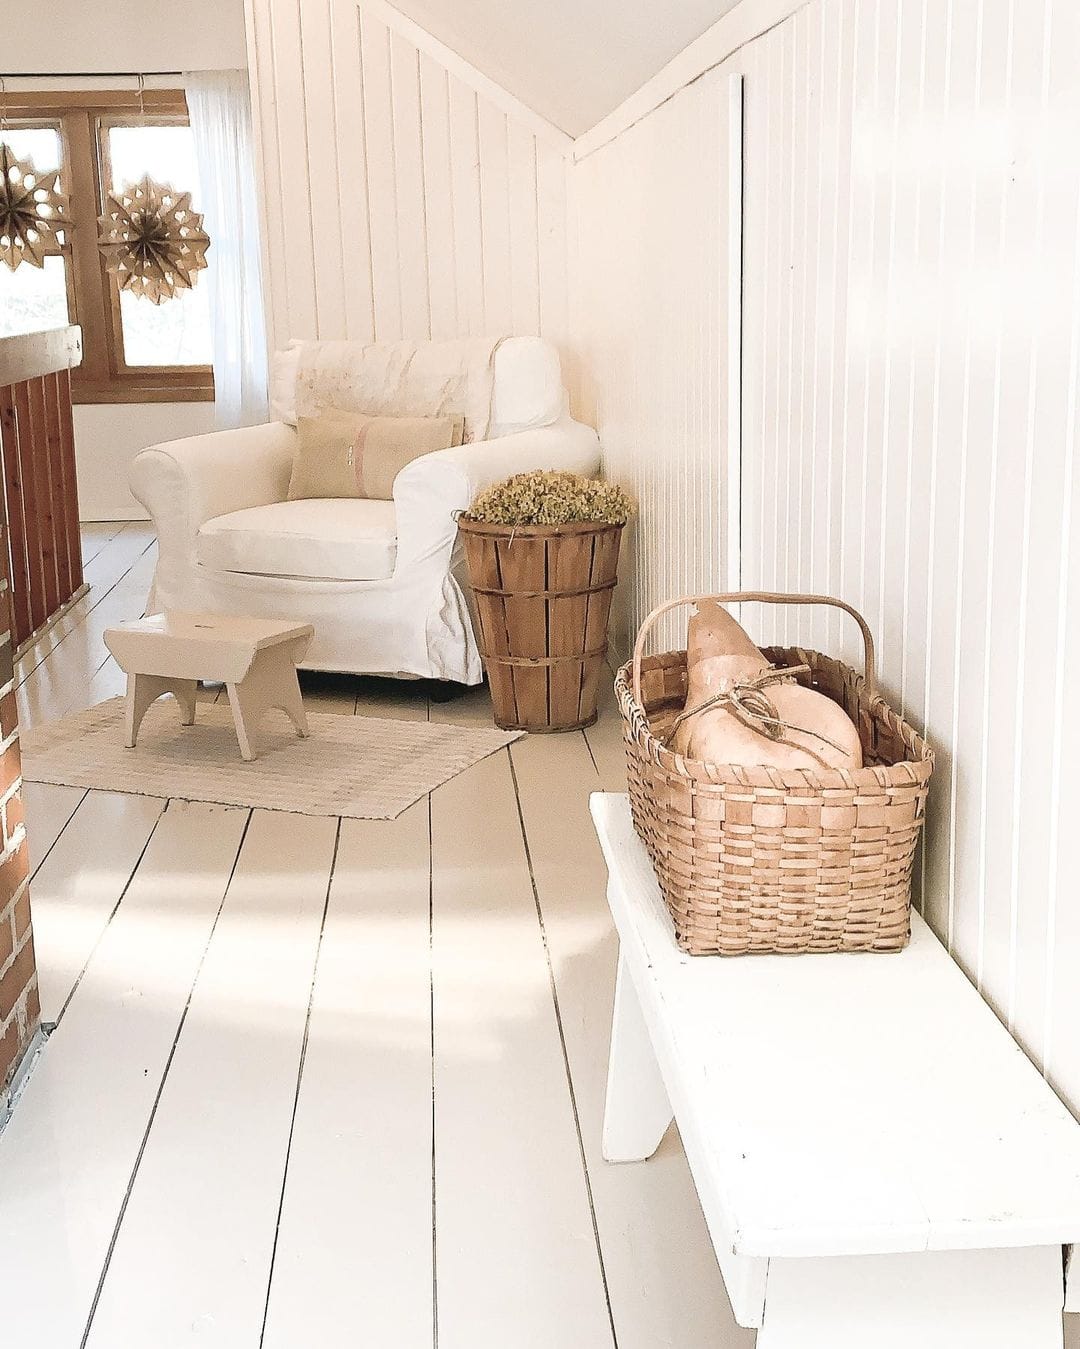 Matching Shiplap Walls and White-Painted Floors